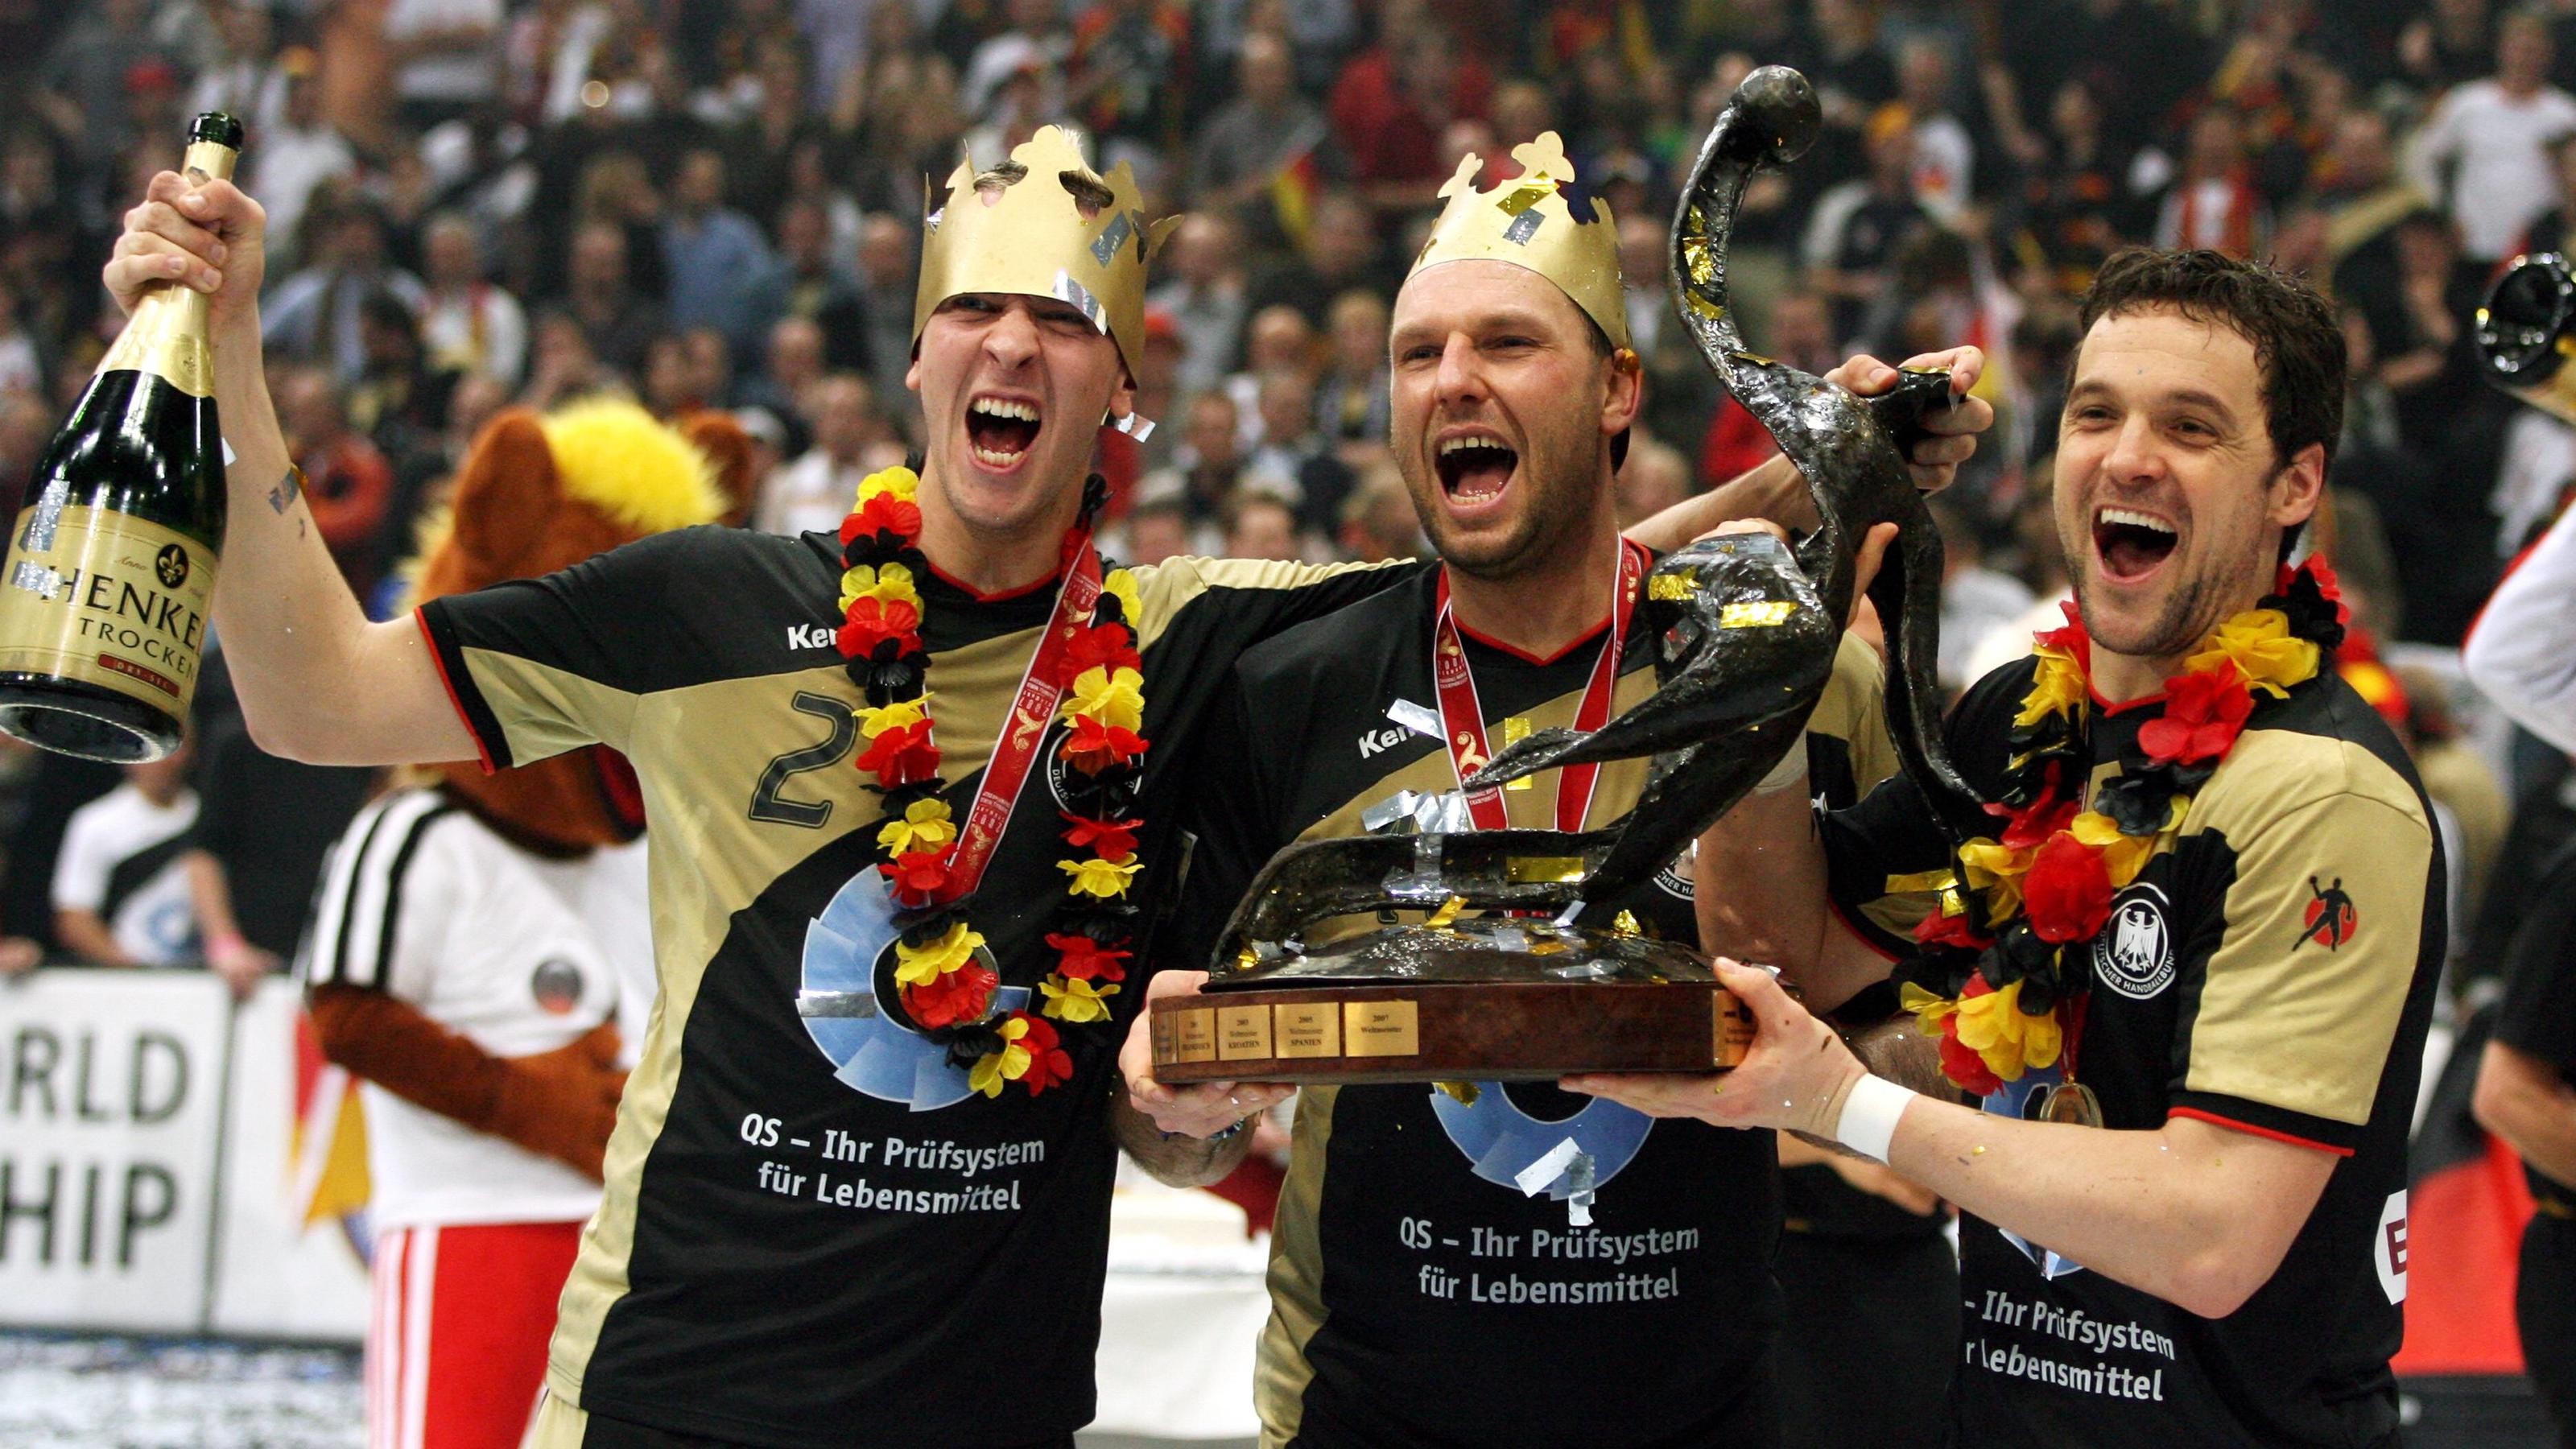 Photo number: 02623773 Date: February 4, 2007 Copyright: imago/ContrastGermany - 2007 World Champion, from left: Pascal Hens, Christian Schwarzer and Markus Baur;  Vdig, cross, close, lead, win, winner, victory celebrations, final celebrations, final celebrations, jubilation, wash